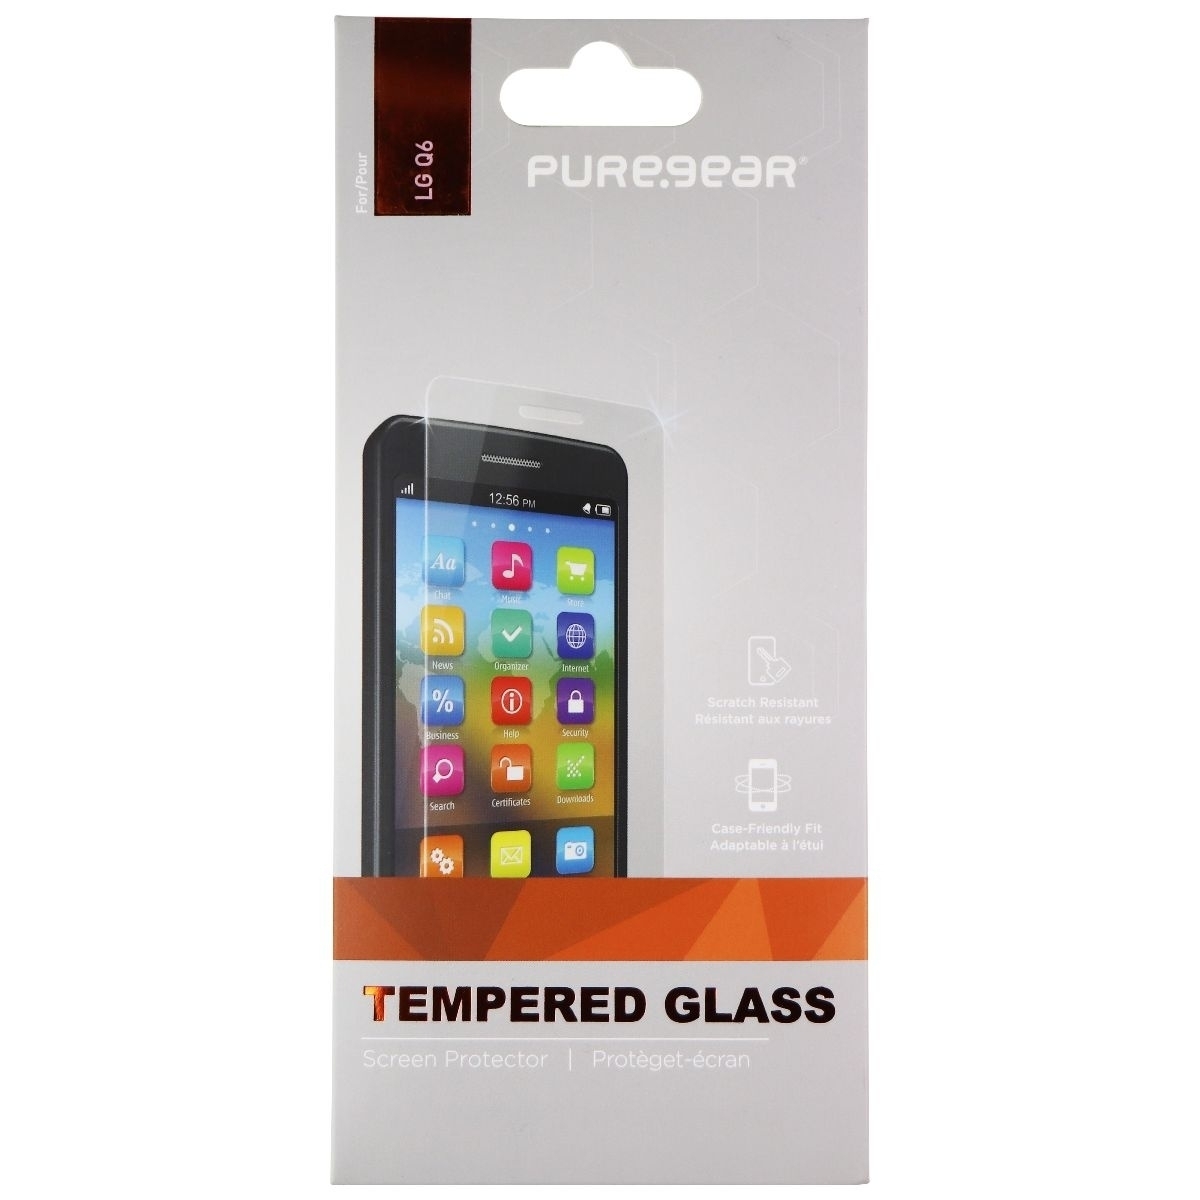 PureGear Tempered Glass Screen Protector For LG Q6 - Clear